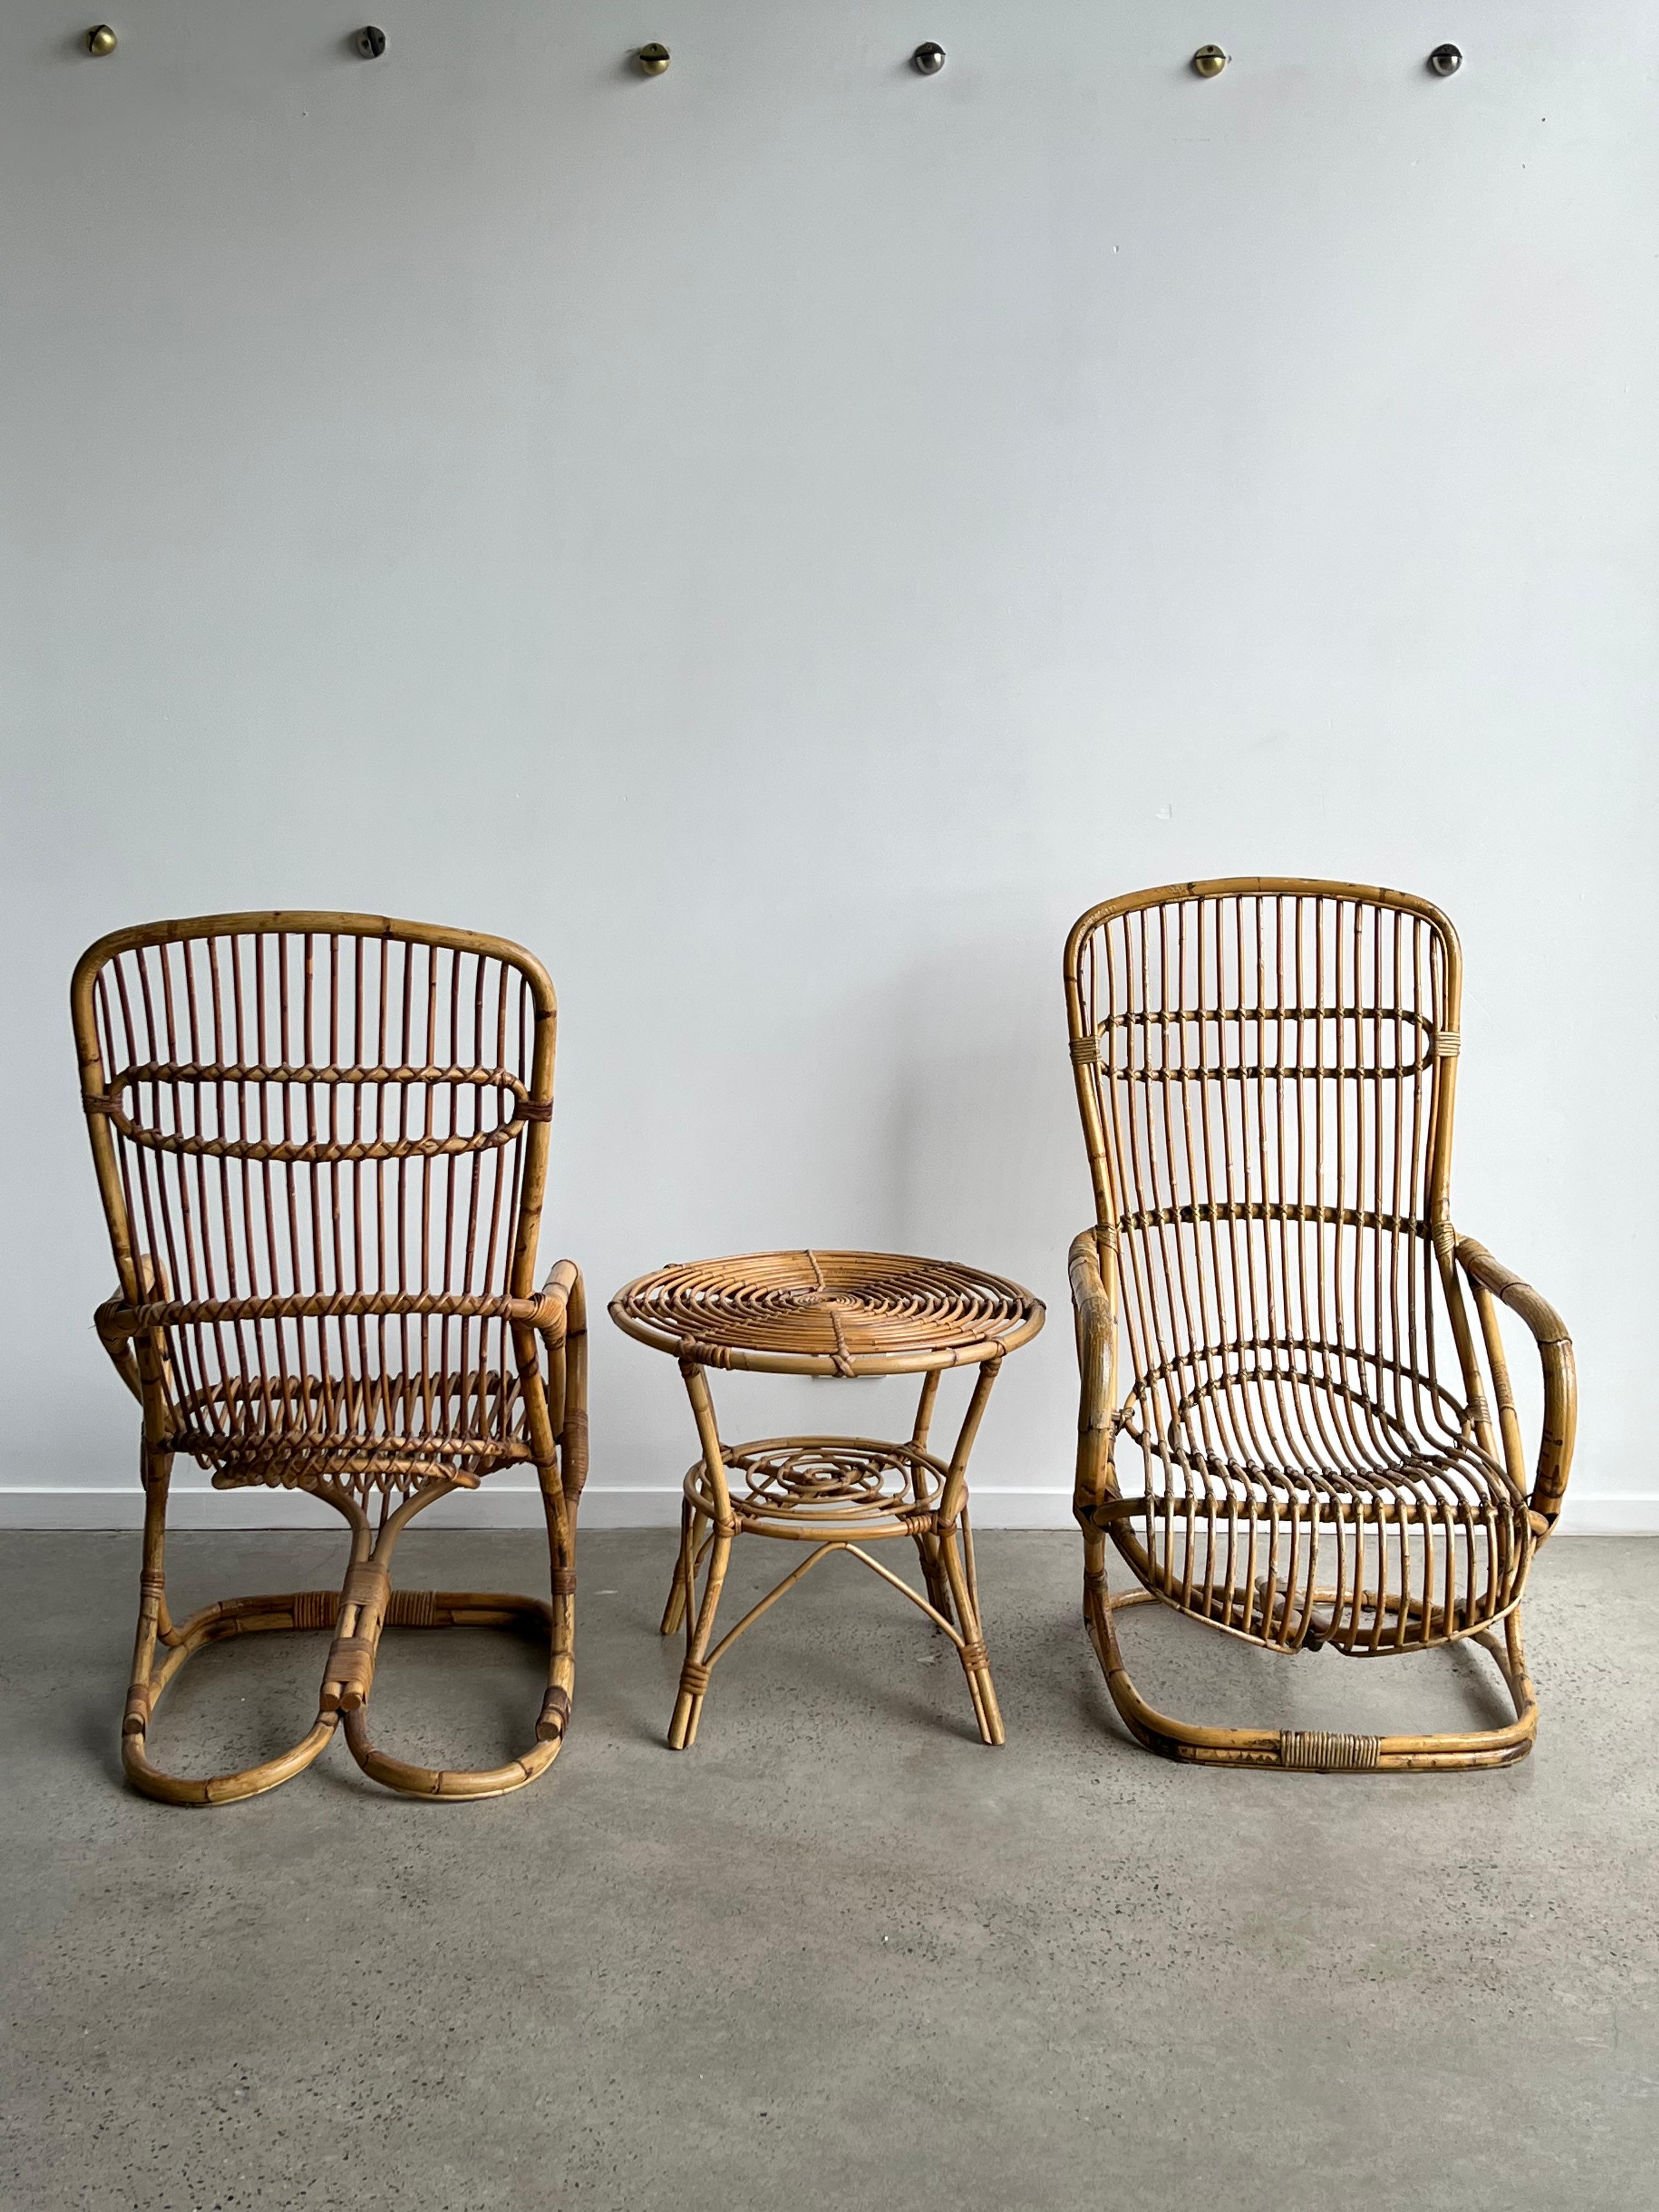 Mid-20th Century Italian Set of Two Chairs and One Side Table in Bamboo by Tito Agnoli 1960s